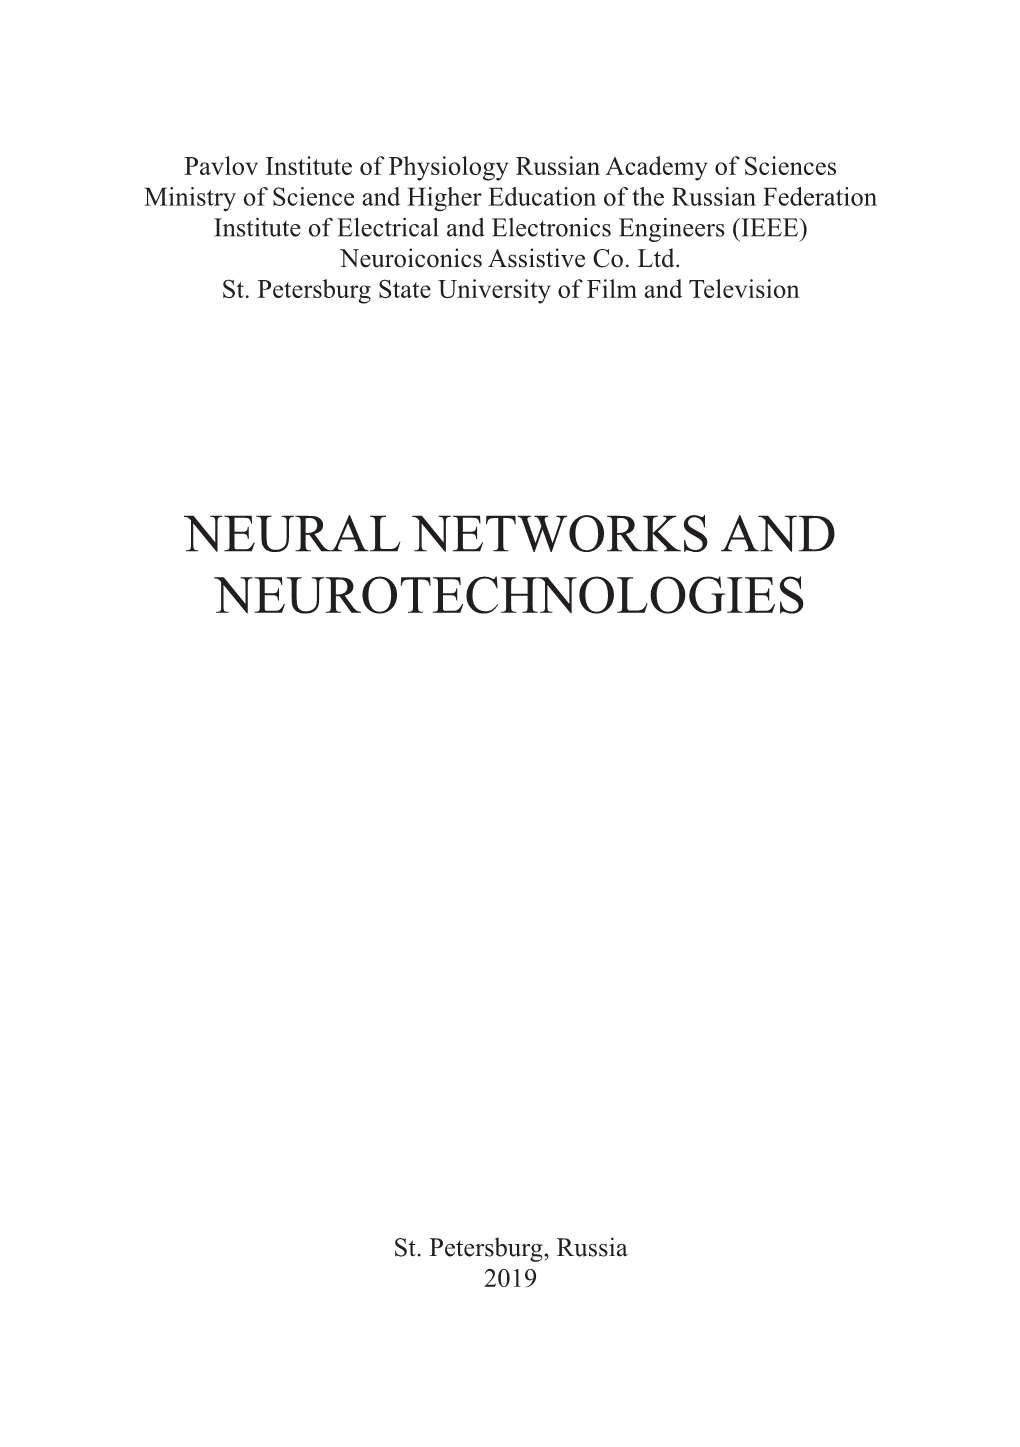 Neural Networks and Neurotechnologies